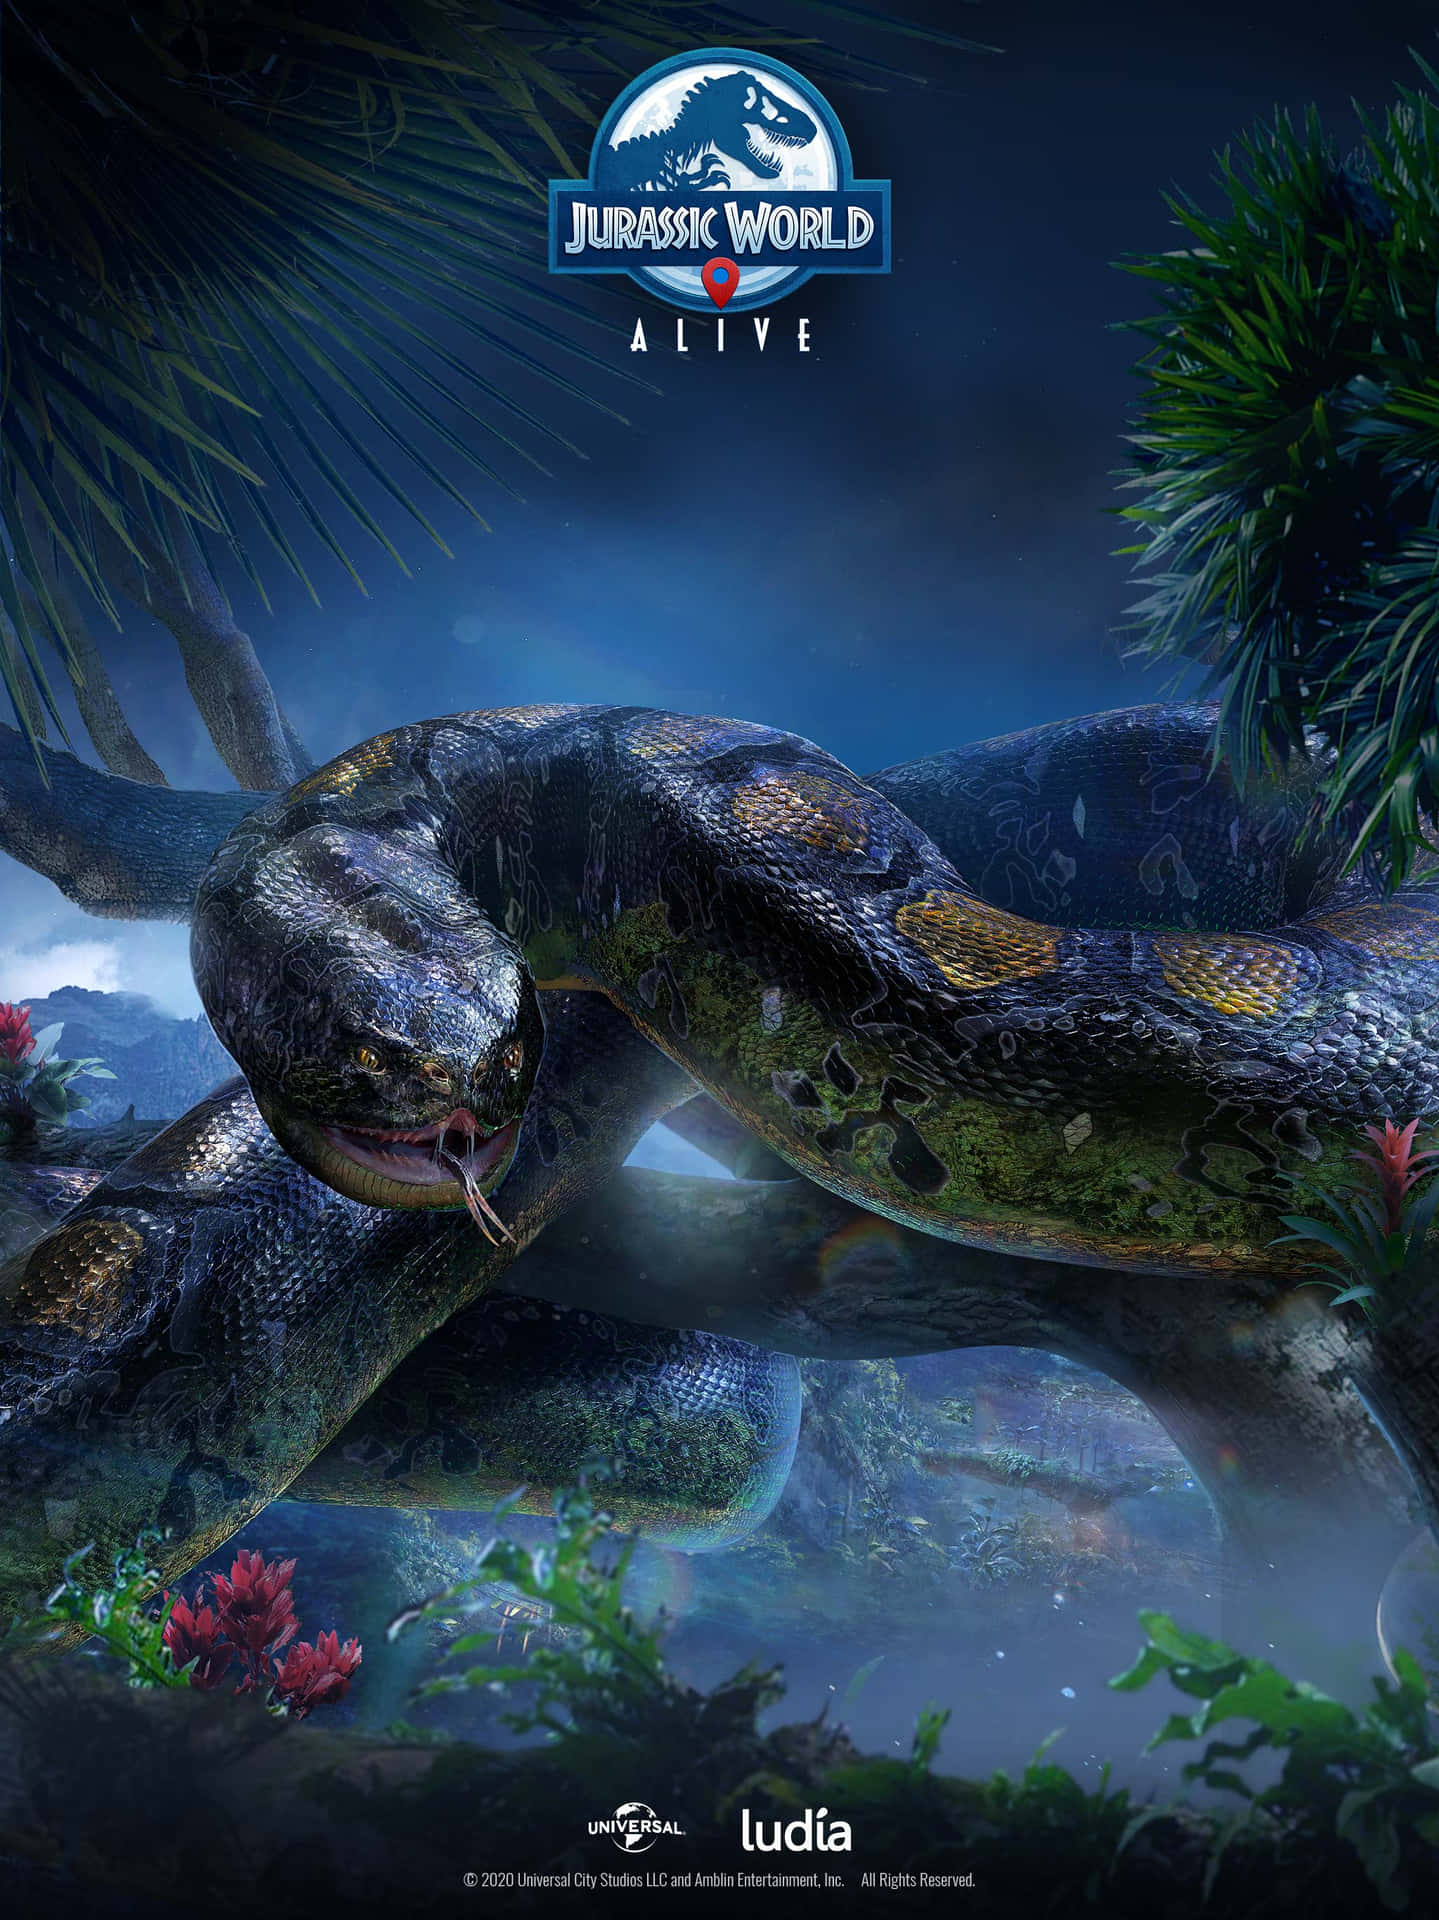 Carnotaurus  New Jurassic World Alive Wallpaper available for all devices  on the official Jurassic World Alive website  Facebook